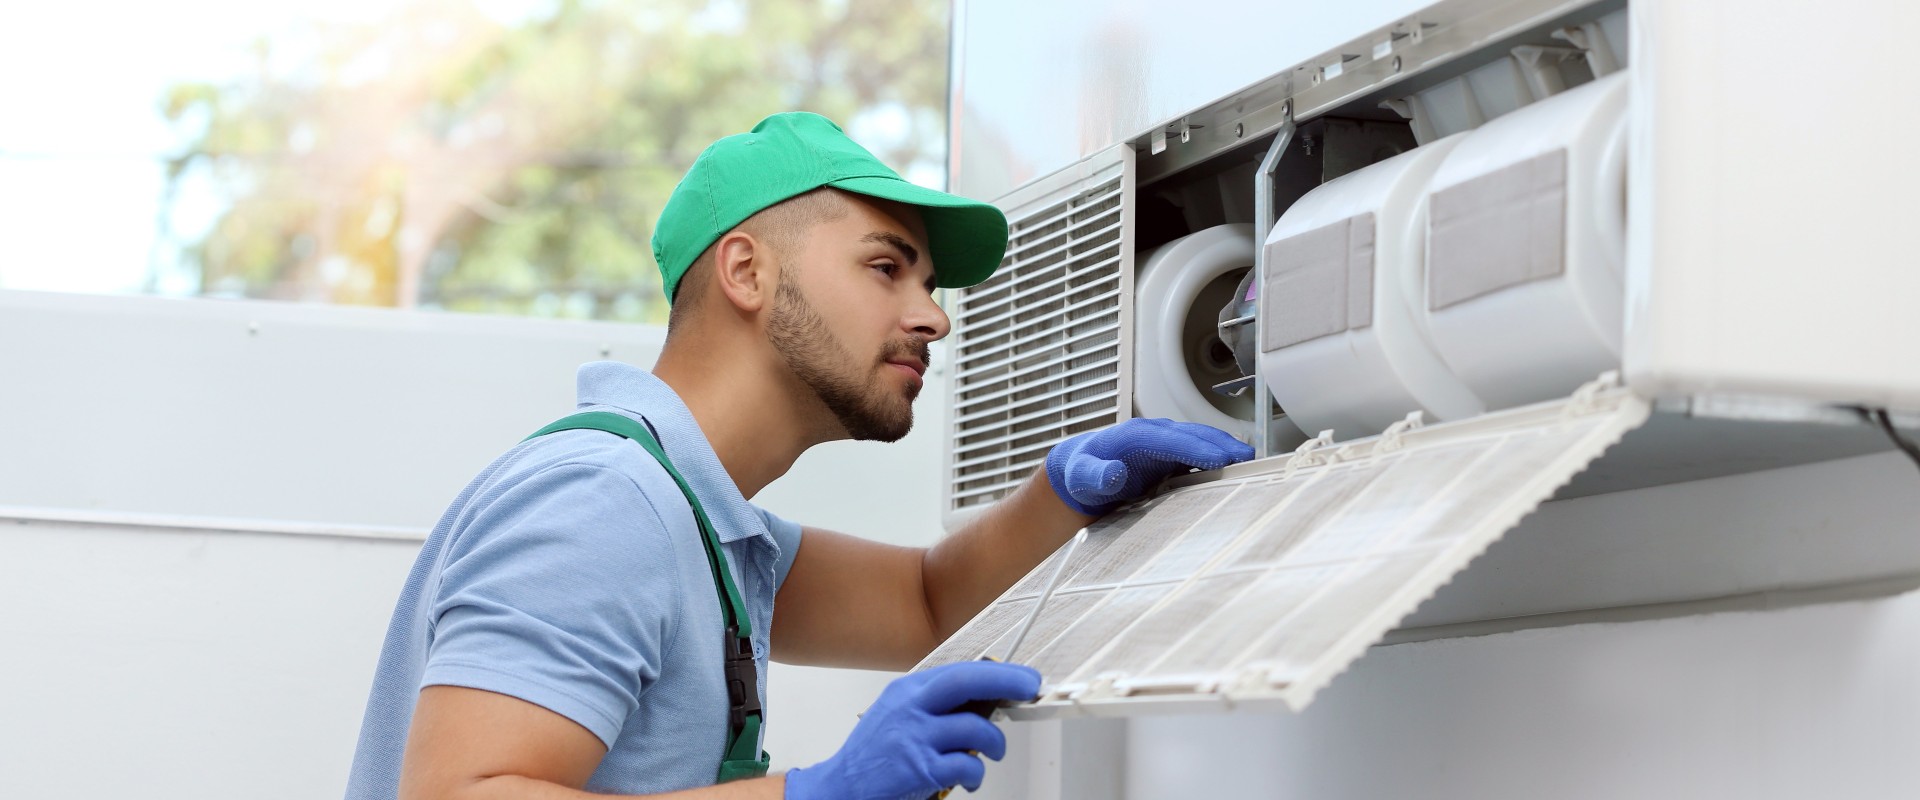 The Benefits of Professional HVAC Maintenance: Tips for Keeping Your Home Comfortable and Your Budget in the Dark